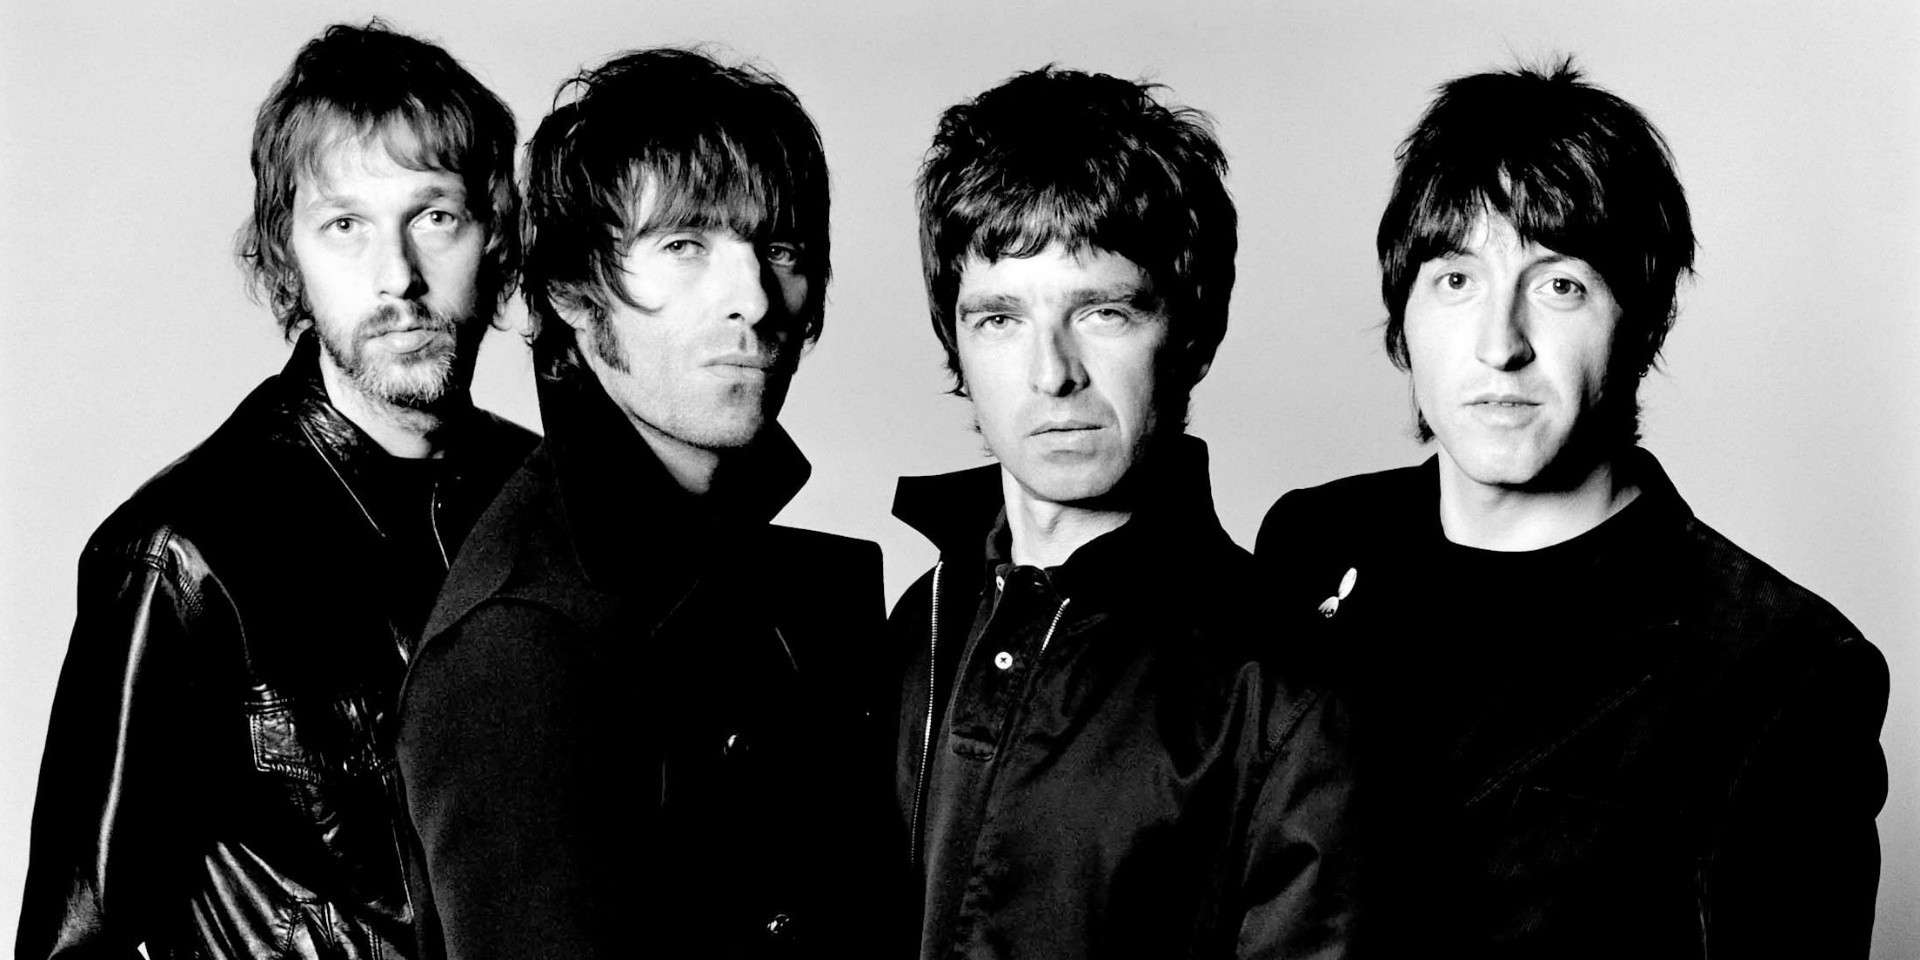 Oasis shares new lyric video for 'Fade Away' in commemoration of debut album's 25th anniversary – watch